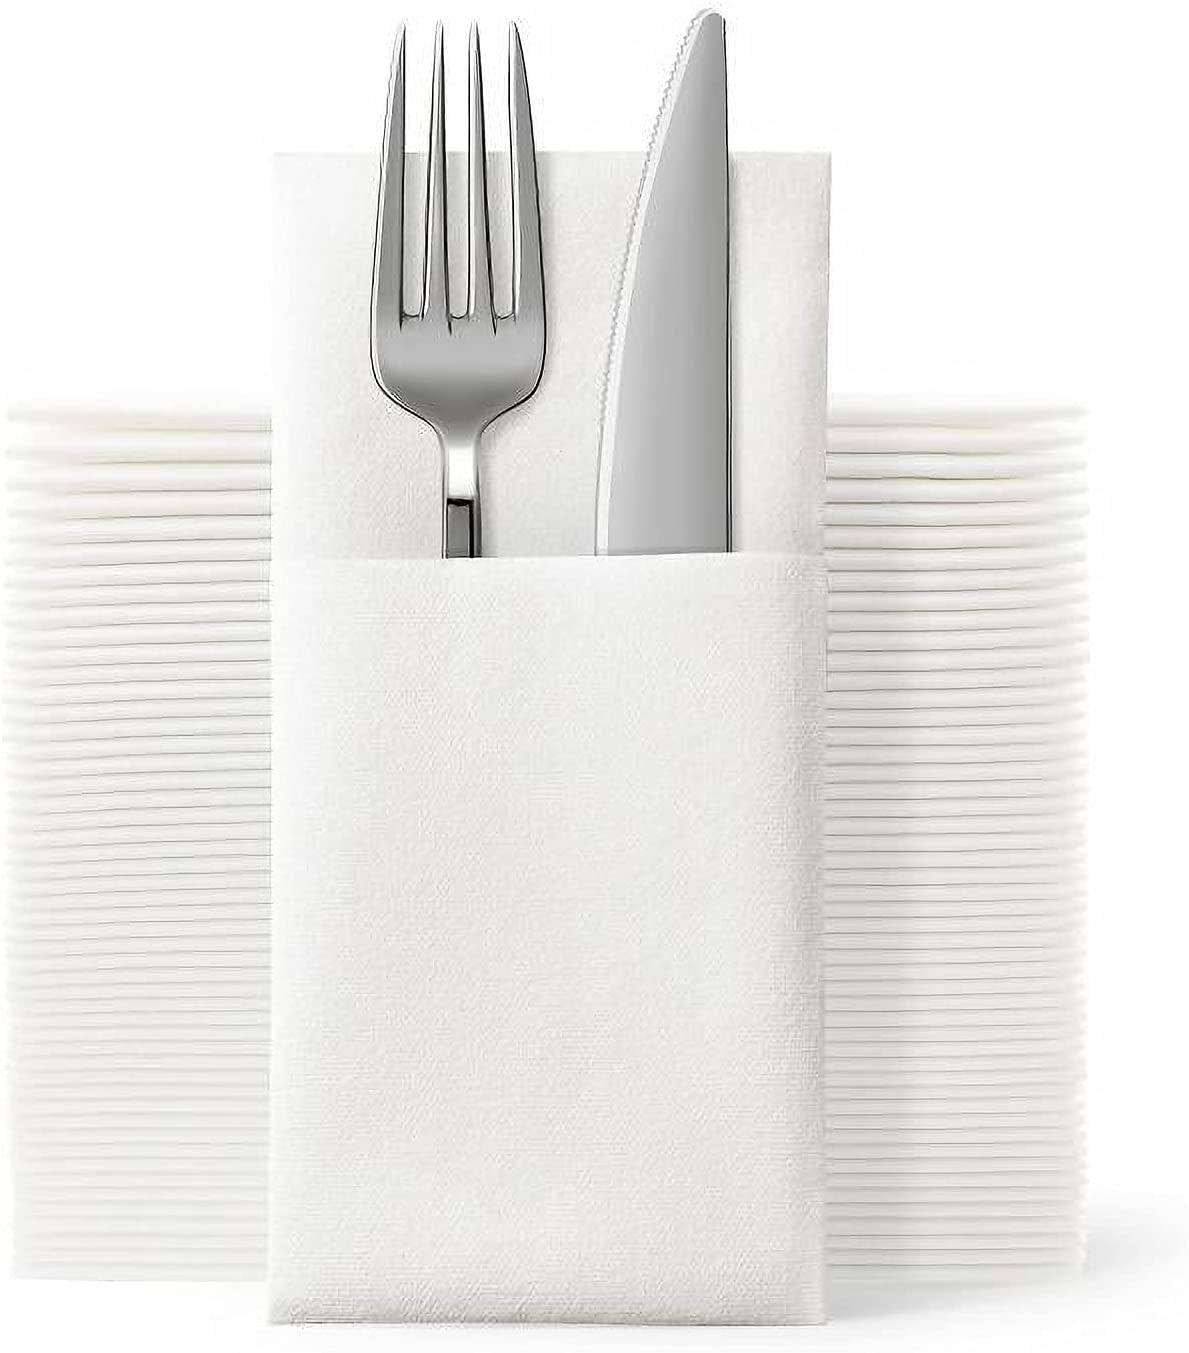 Disposable Cloth Like Napkins, Built-in Flatware Pocket, Wedding Party Linen Feel White Napkin, Prefolded for Silverware,50 Count